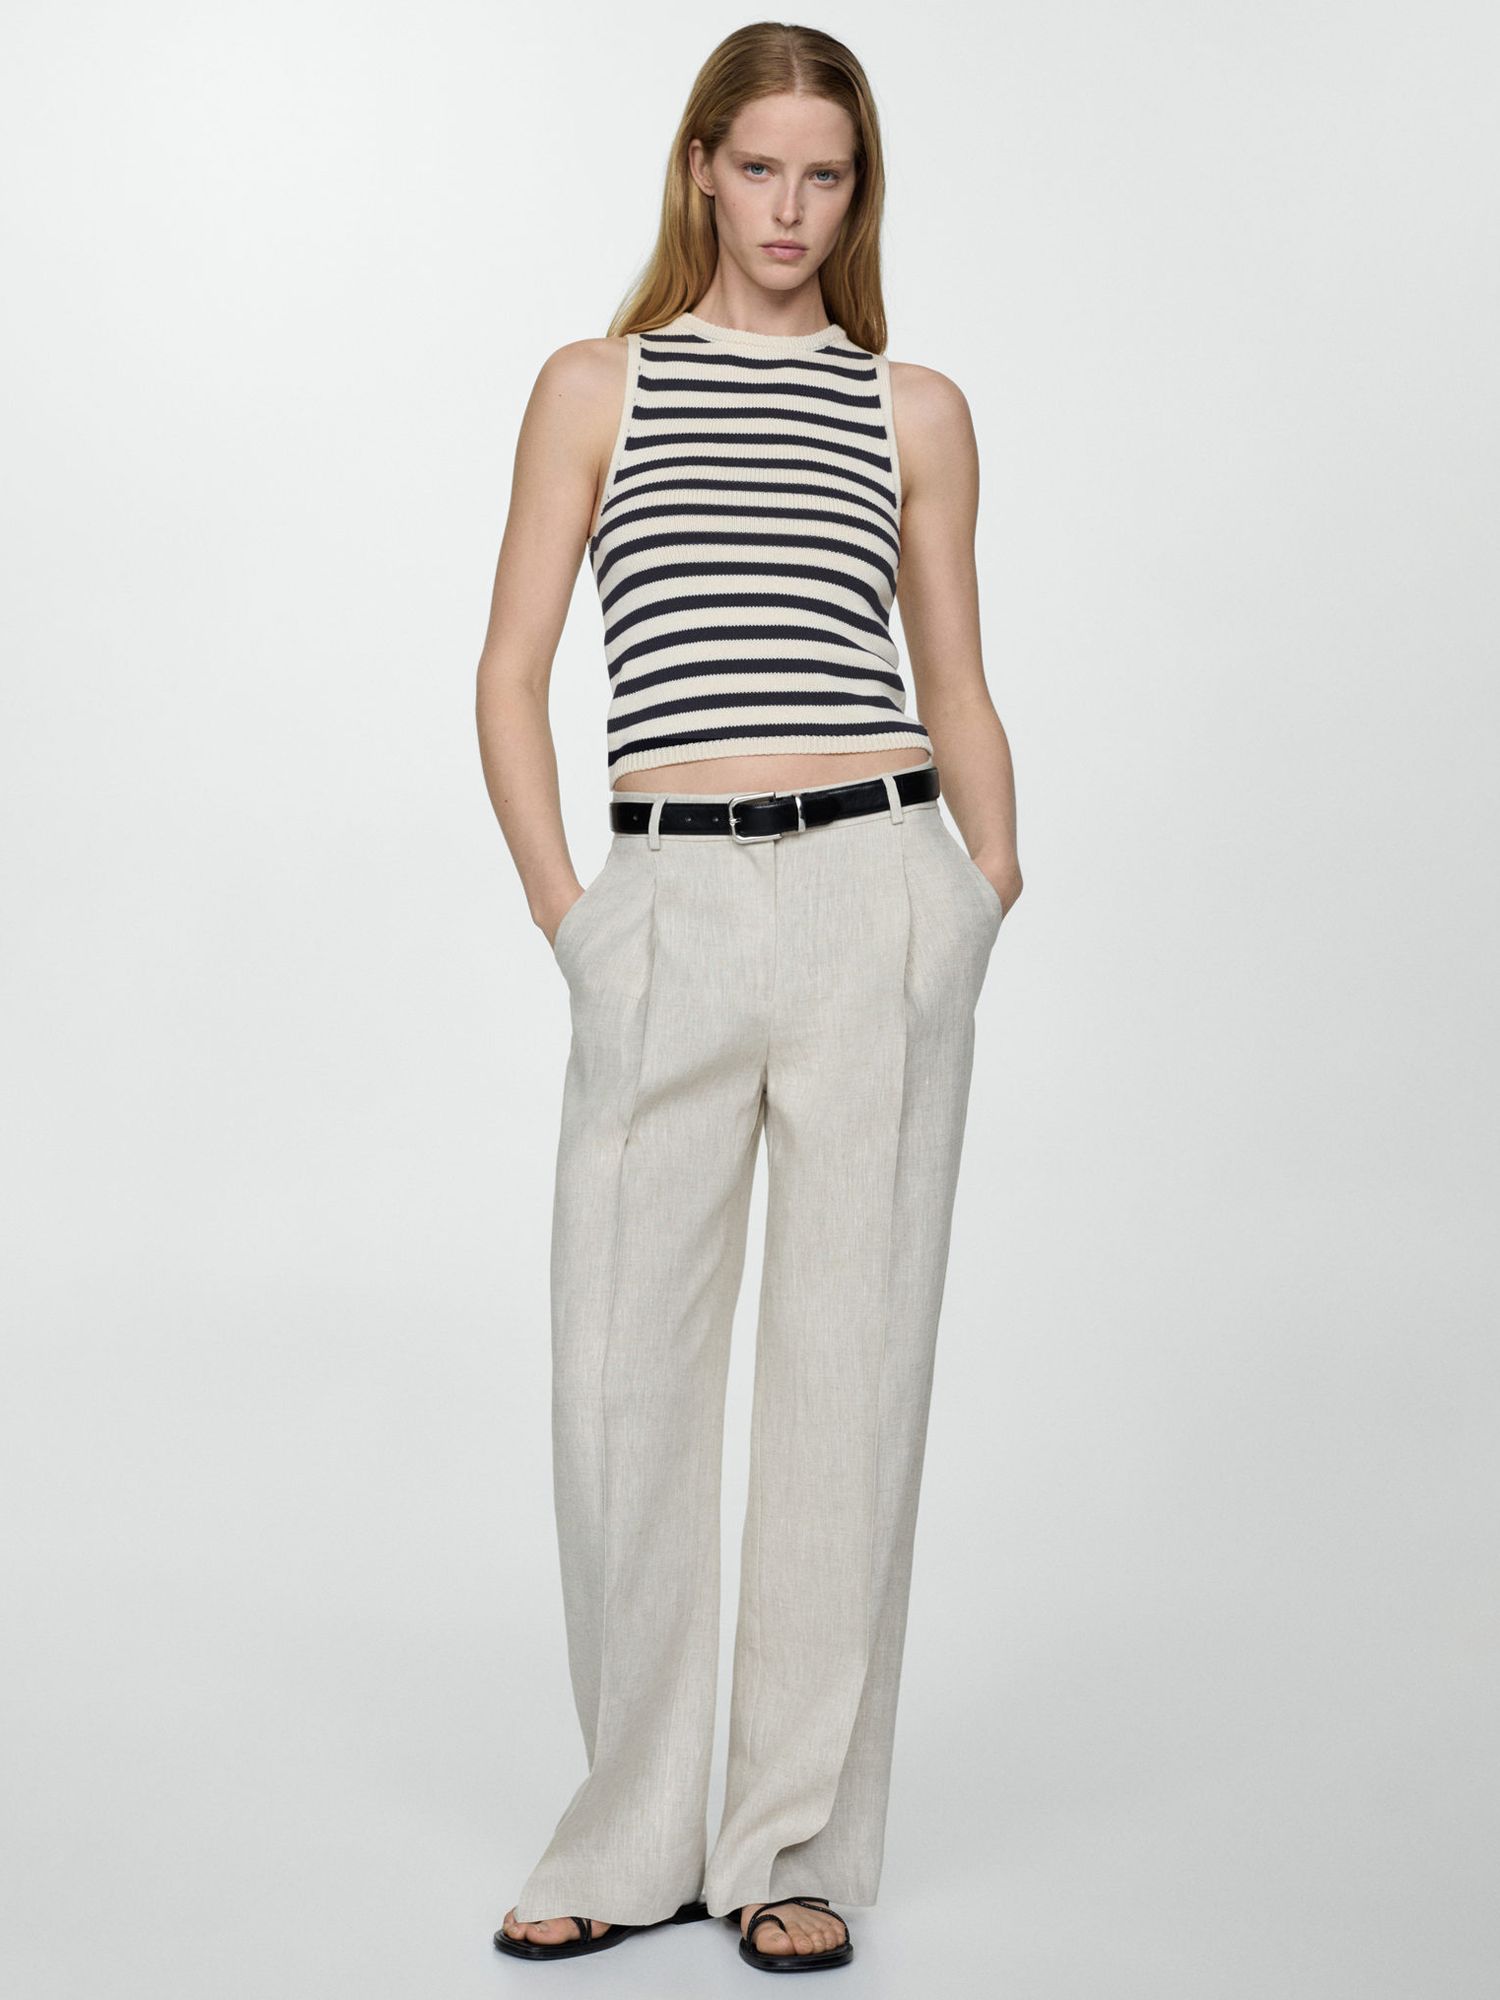 Buy Mango Eliot Round Neck Knitted Top, Navy Online at johnlewis.com